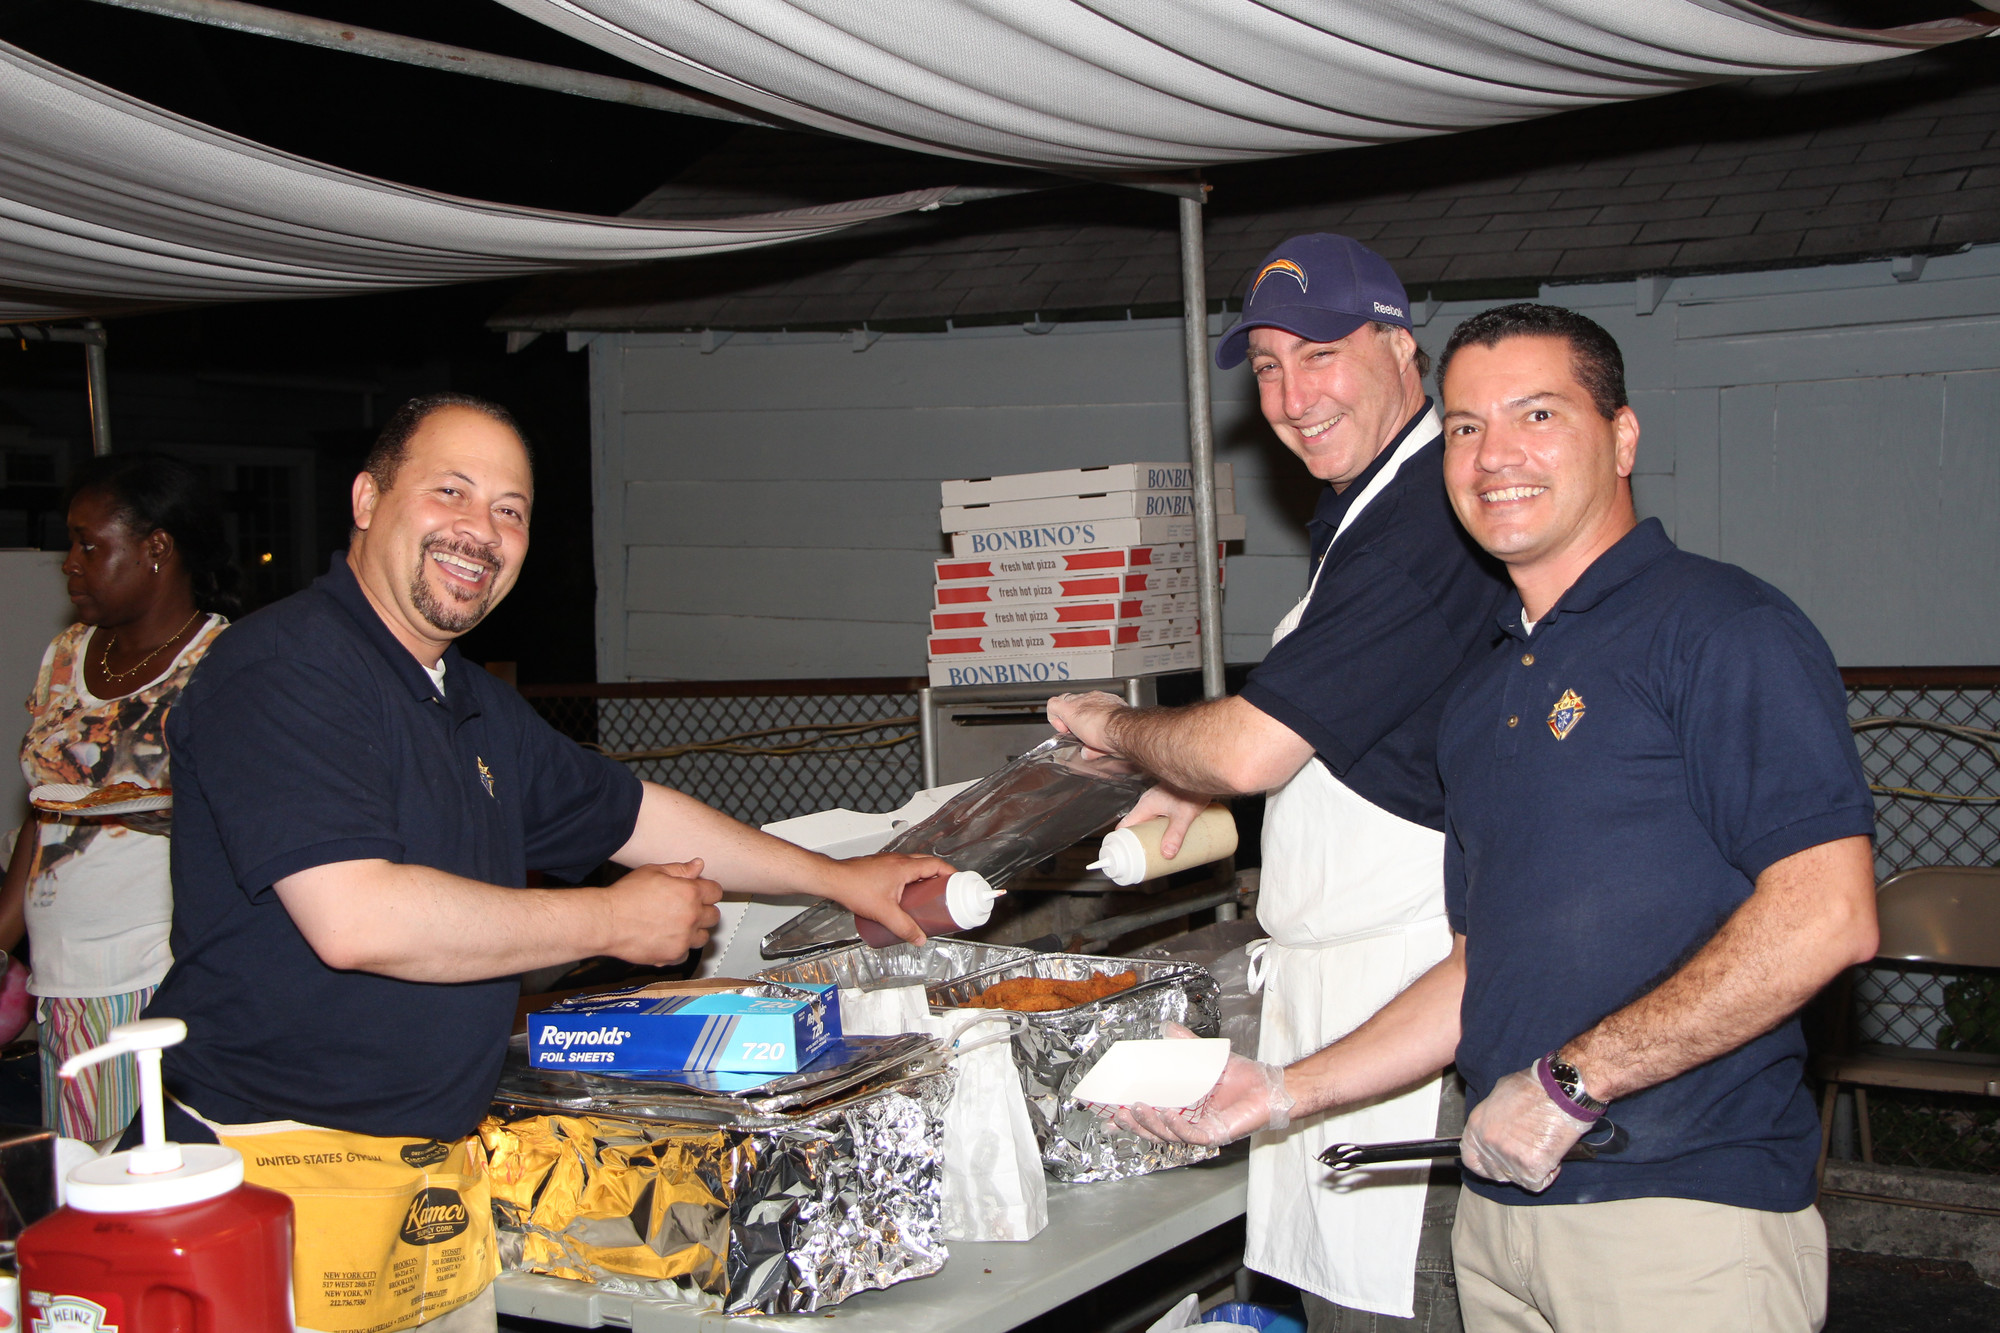 There was a variety of food offered at the St. Christopher’s Feast from July 16 to 19, including items served by volunteers, from left, Herm Pietrera, Richard Ratabolli and Jonathan Rodriguez.